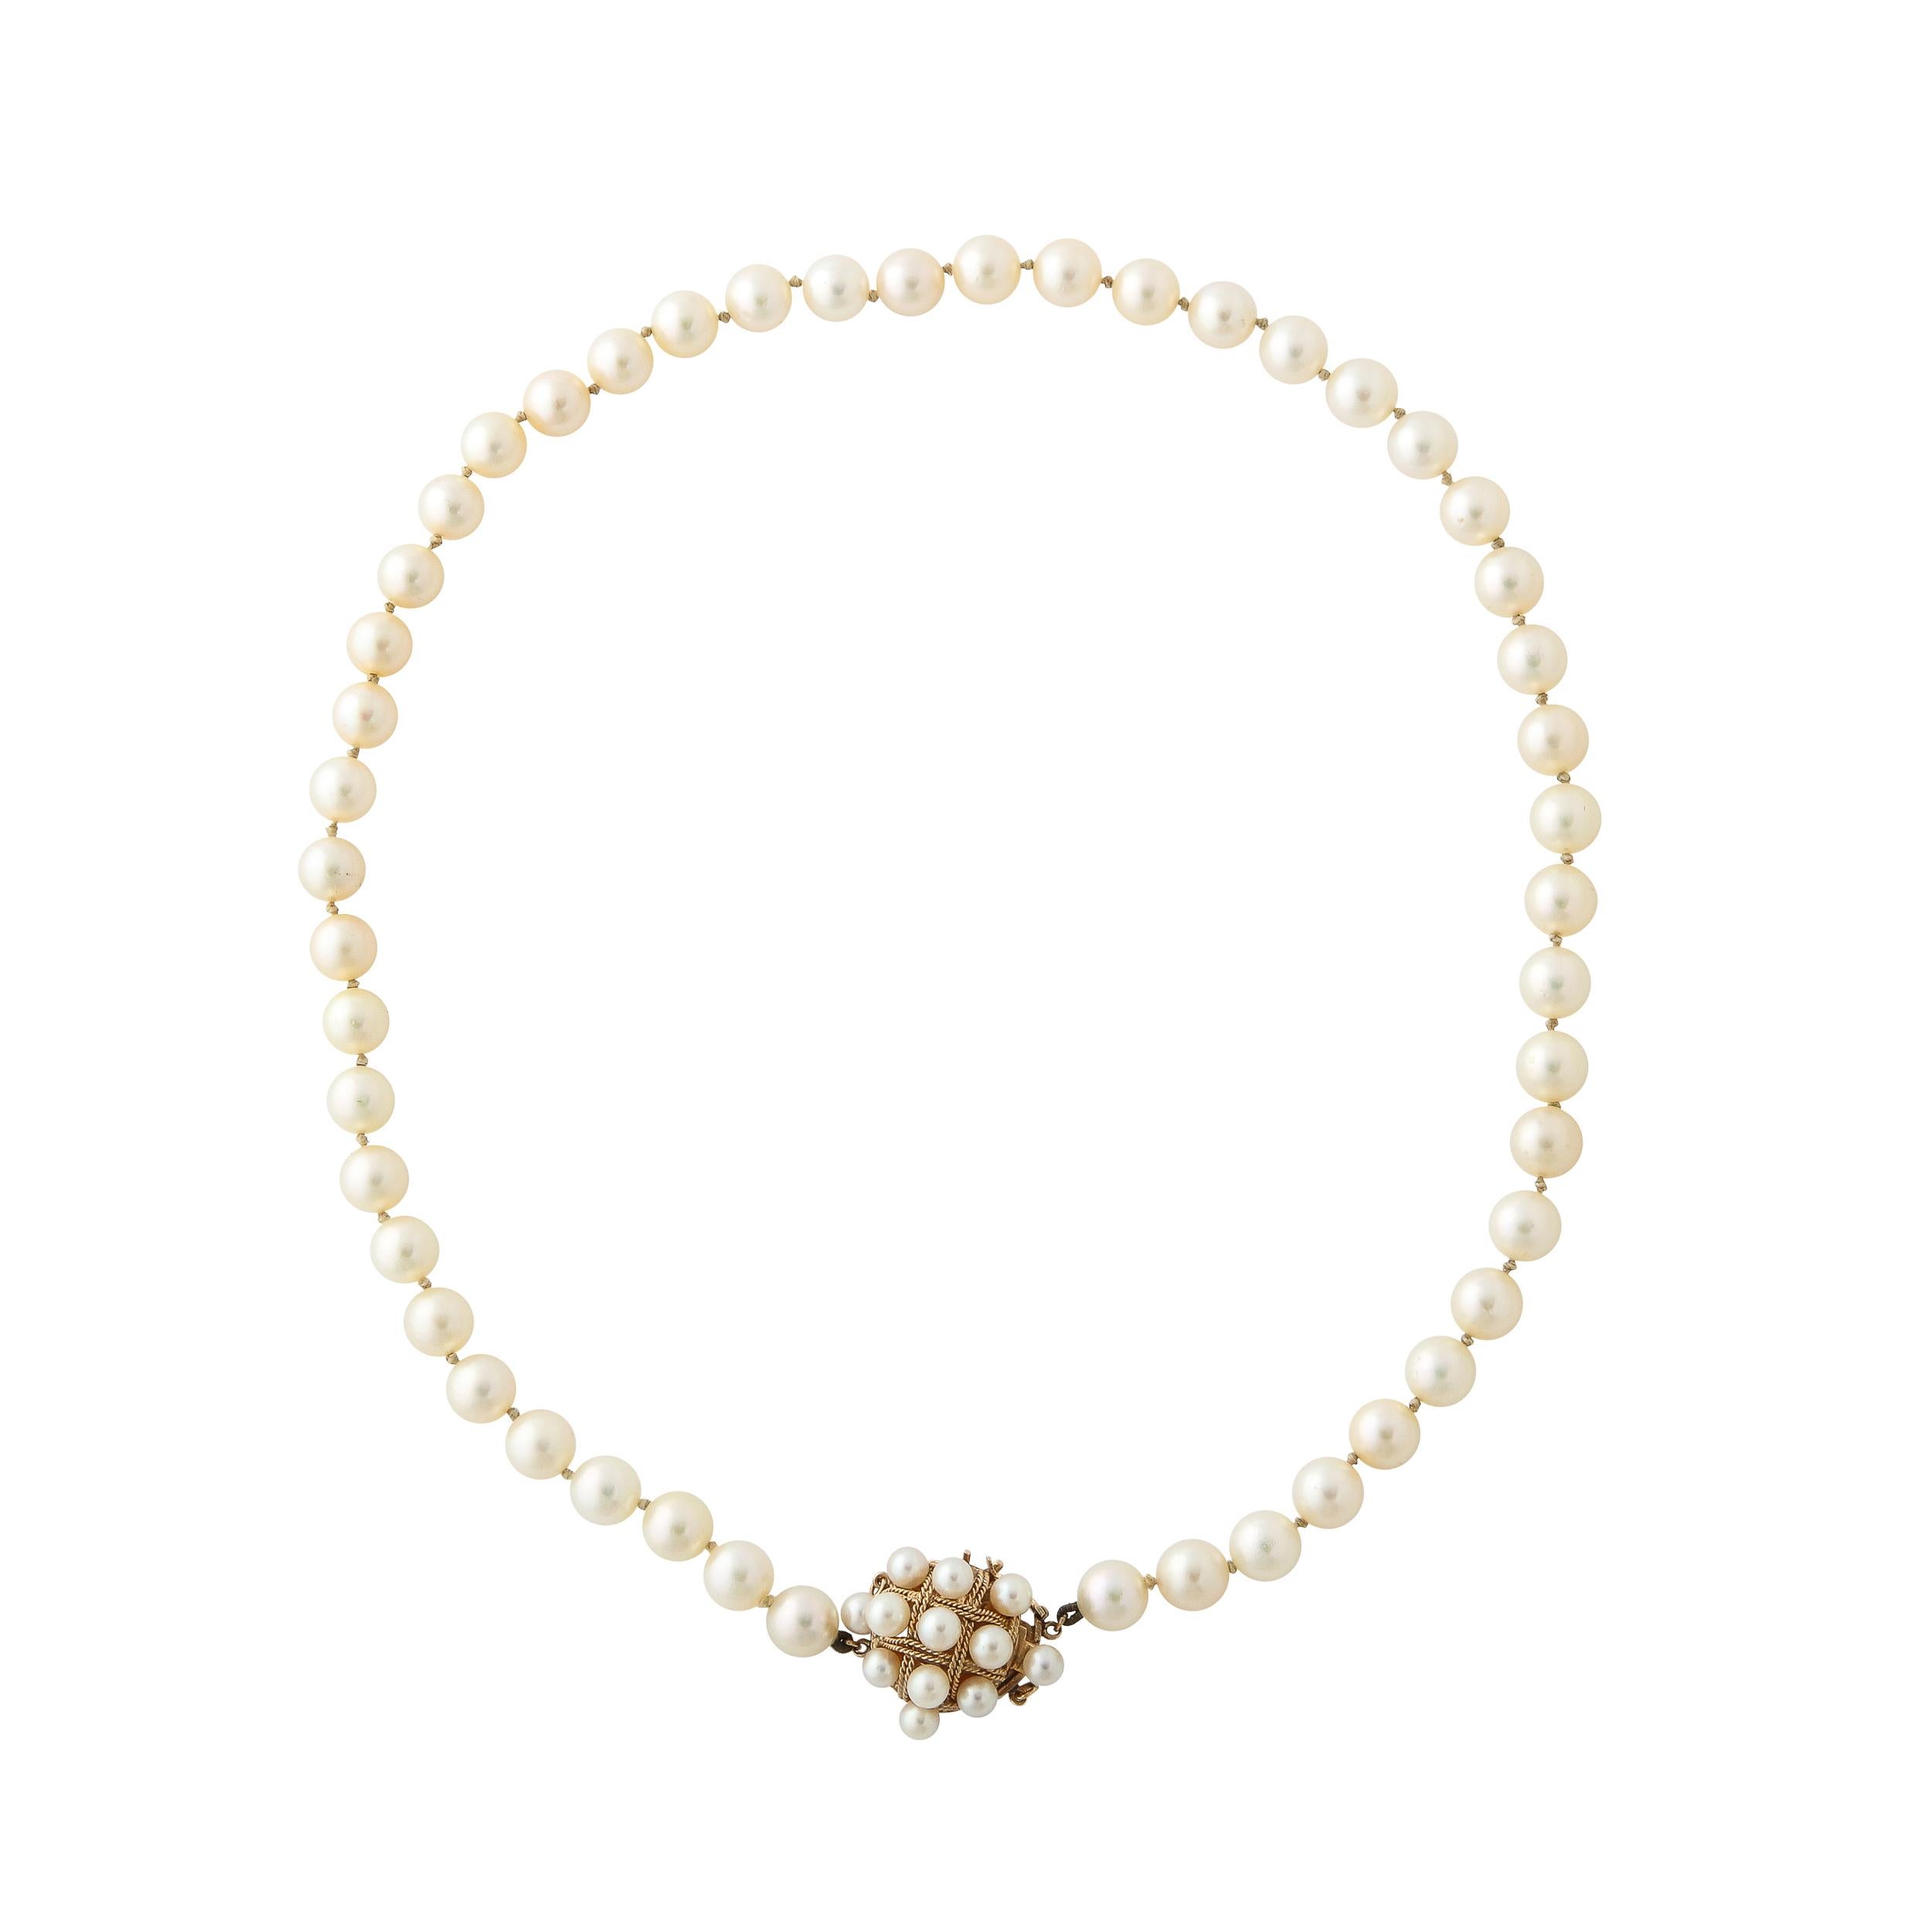 The Mid Century Modernist necklace has 49 6 mm pearls and features a clasp with a braided 14k twisted rope design in a cross hatch form and is set with 11 smaller pearls.  One could wear this with the clasp in the front or the back depending on the